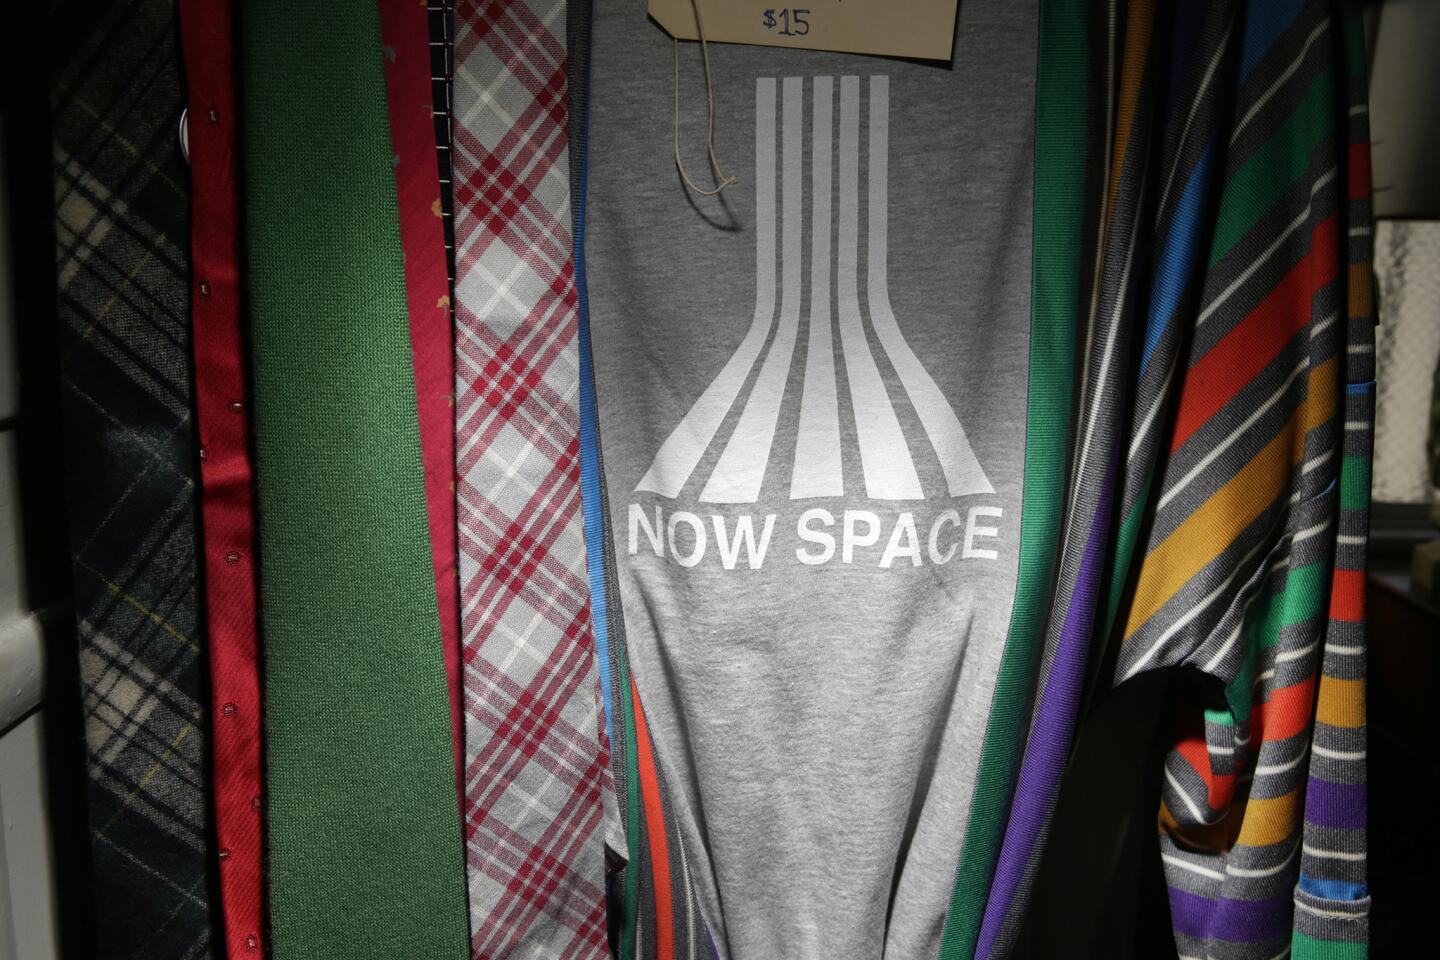 Now Space